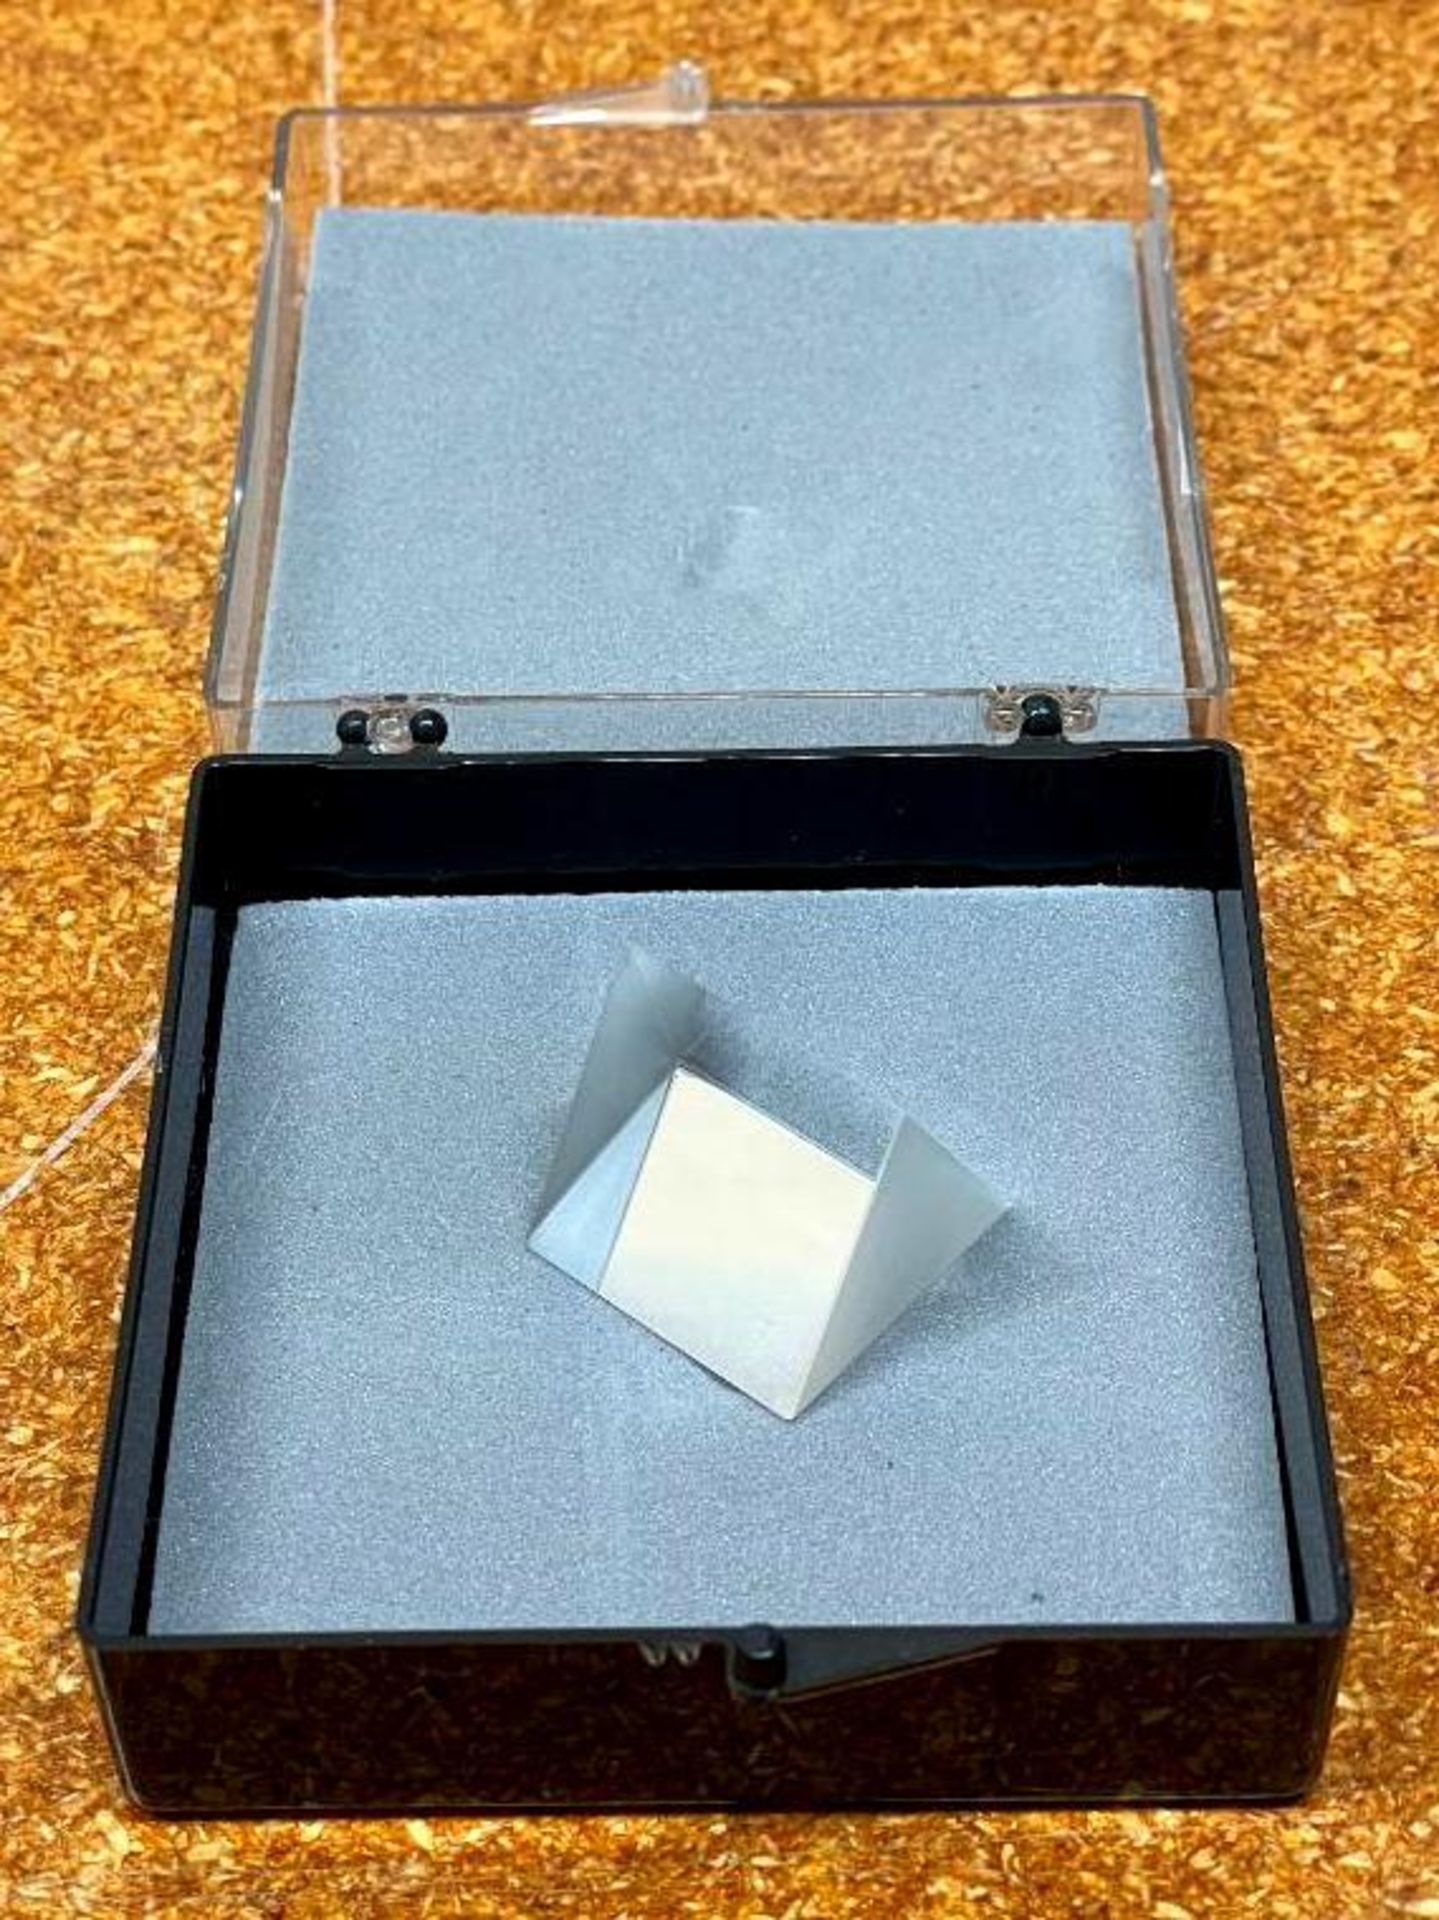 1" CALCIUM FLUORIDE EQUILATERAL PRISM BRAND/MODEL: JANOS A1431-025 INFORMATION: CaF2 PRISM QTY: 1